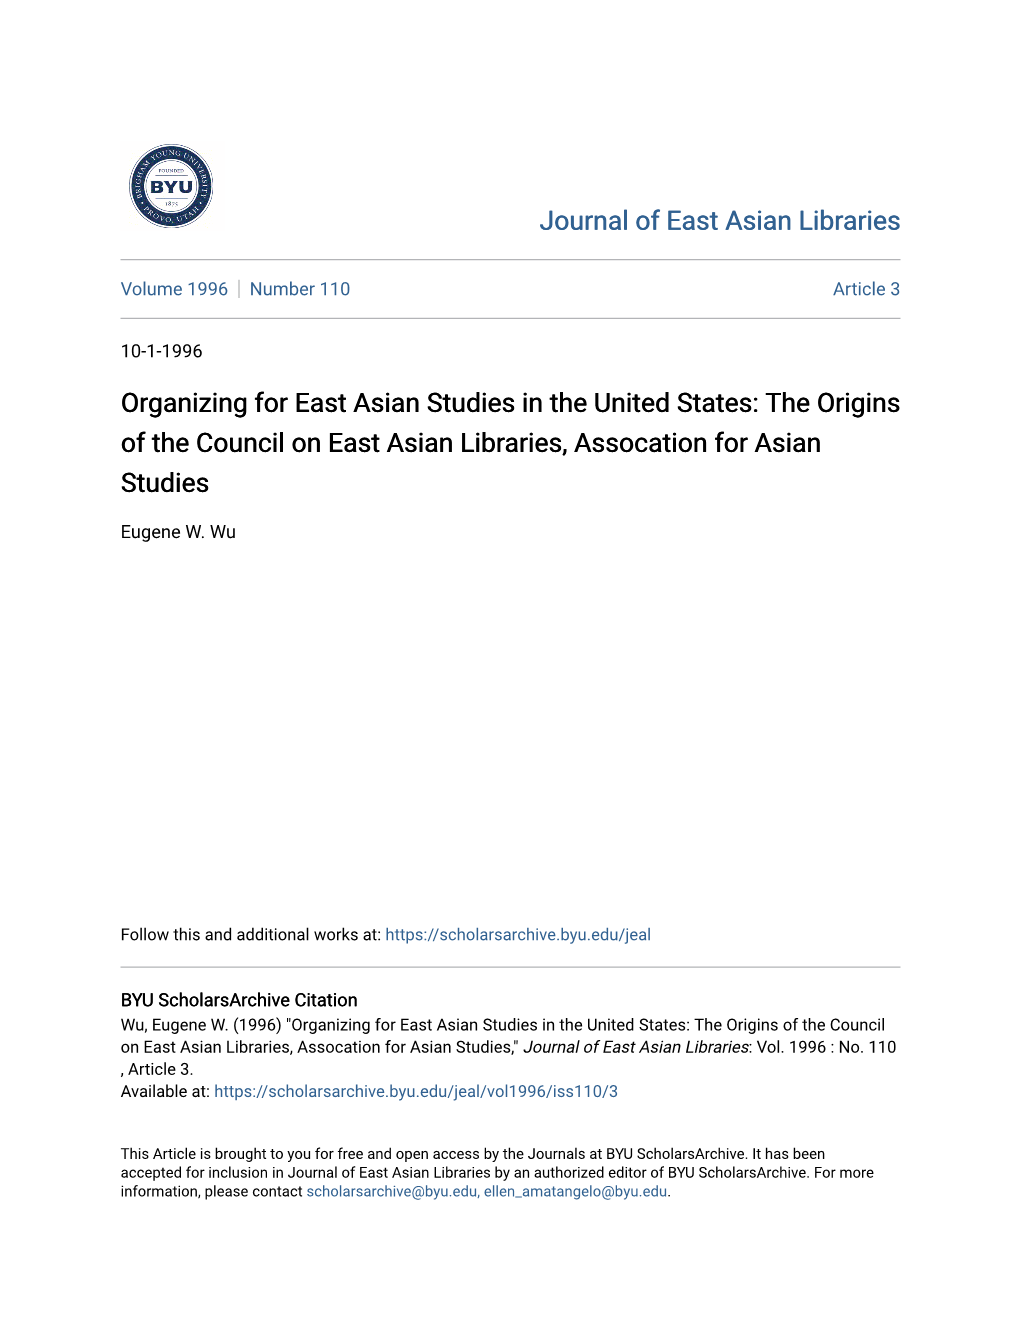 Organizing for East Asian Studies in the United States: the Origins of the Council on East Asian Libraries, Assocation for Asian Studies